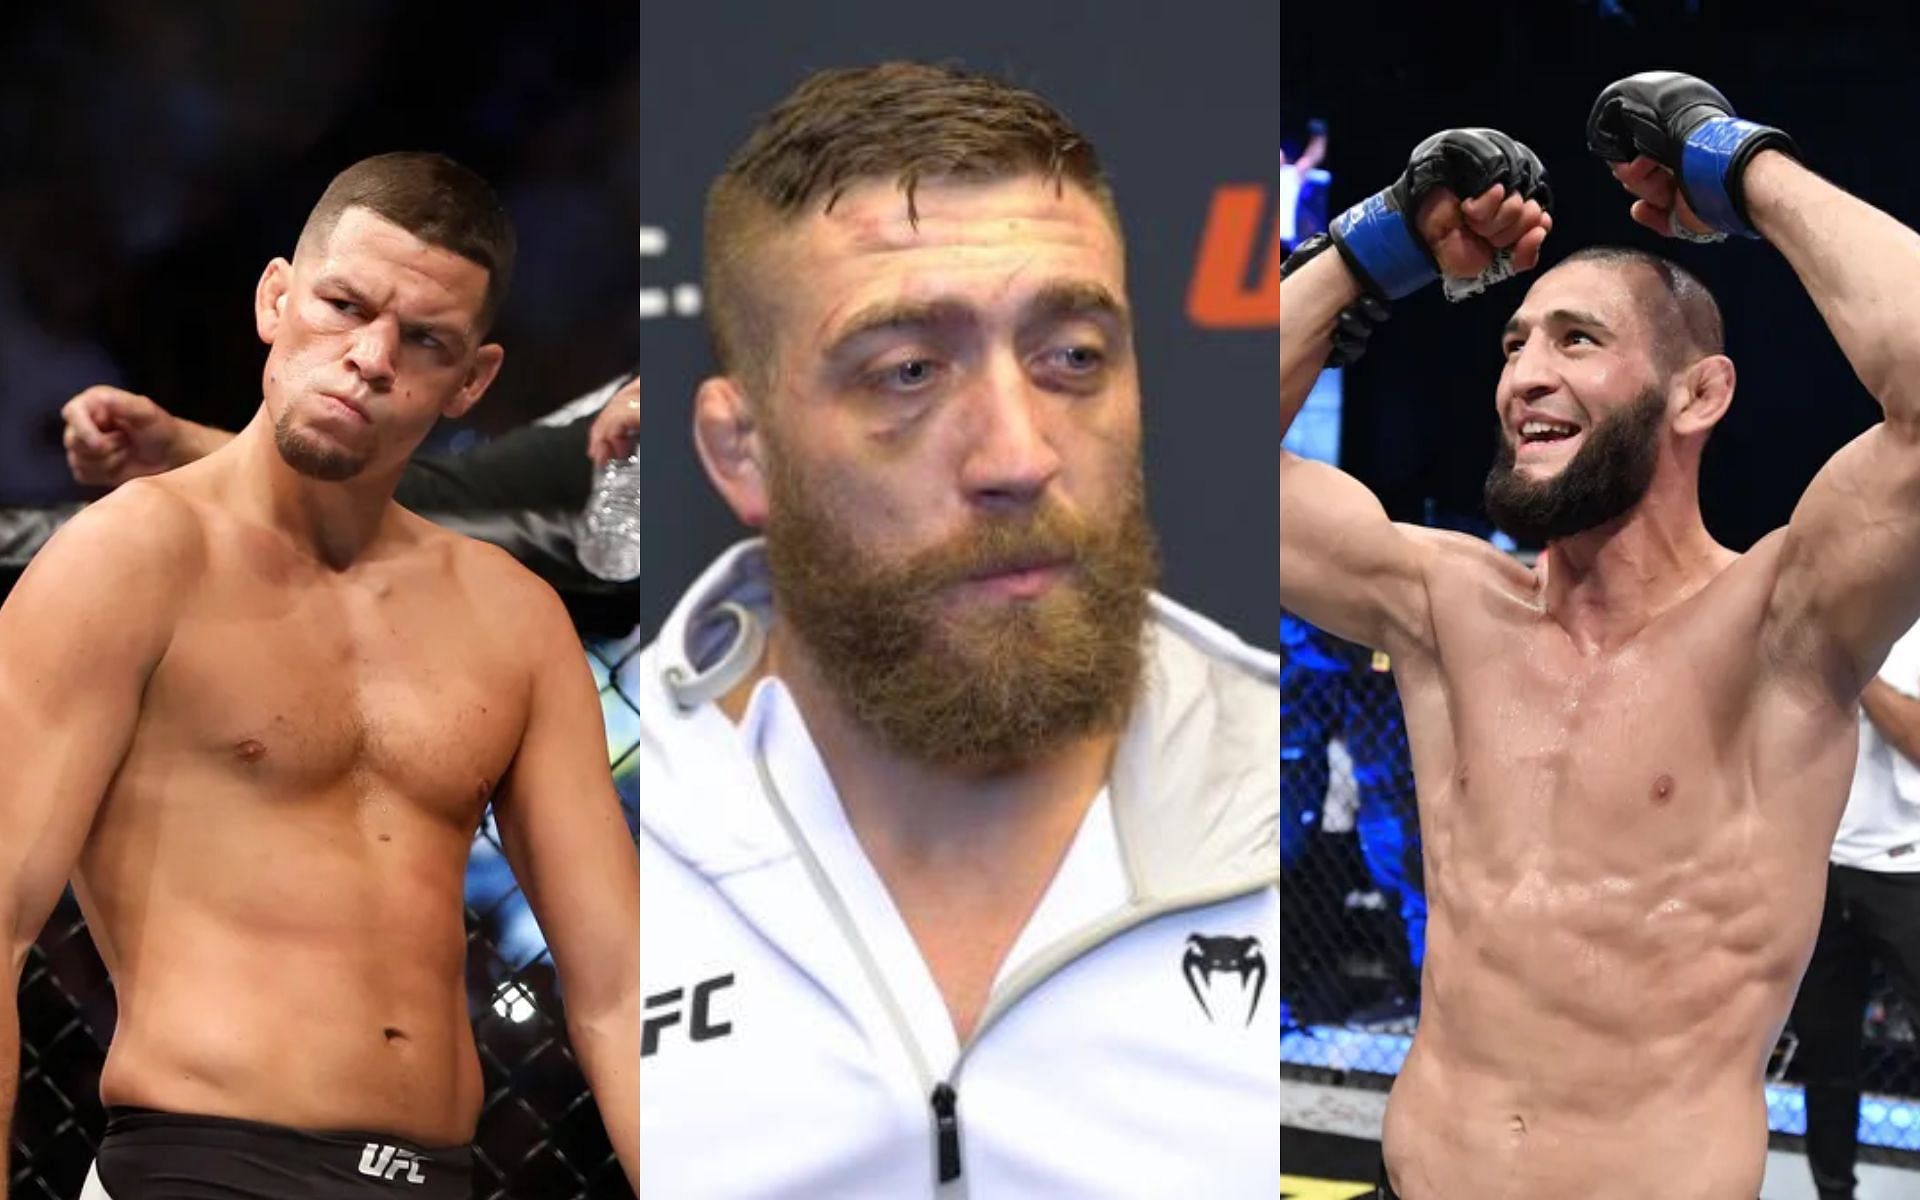 From left to right: Nate Diaz, Gerald Meerschaert, and Khamzat Chimaev [Image credits: Steve Marcus/Getty Images, UFC.com, and Chris Unger/Zuffa LLC]